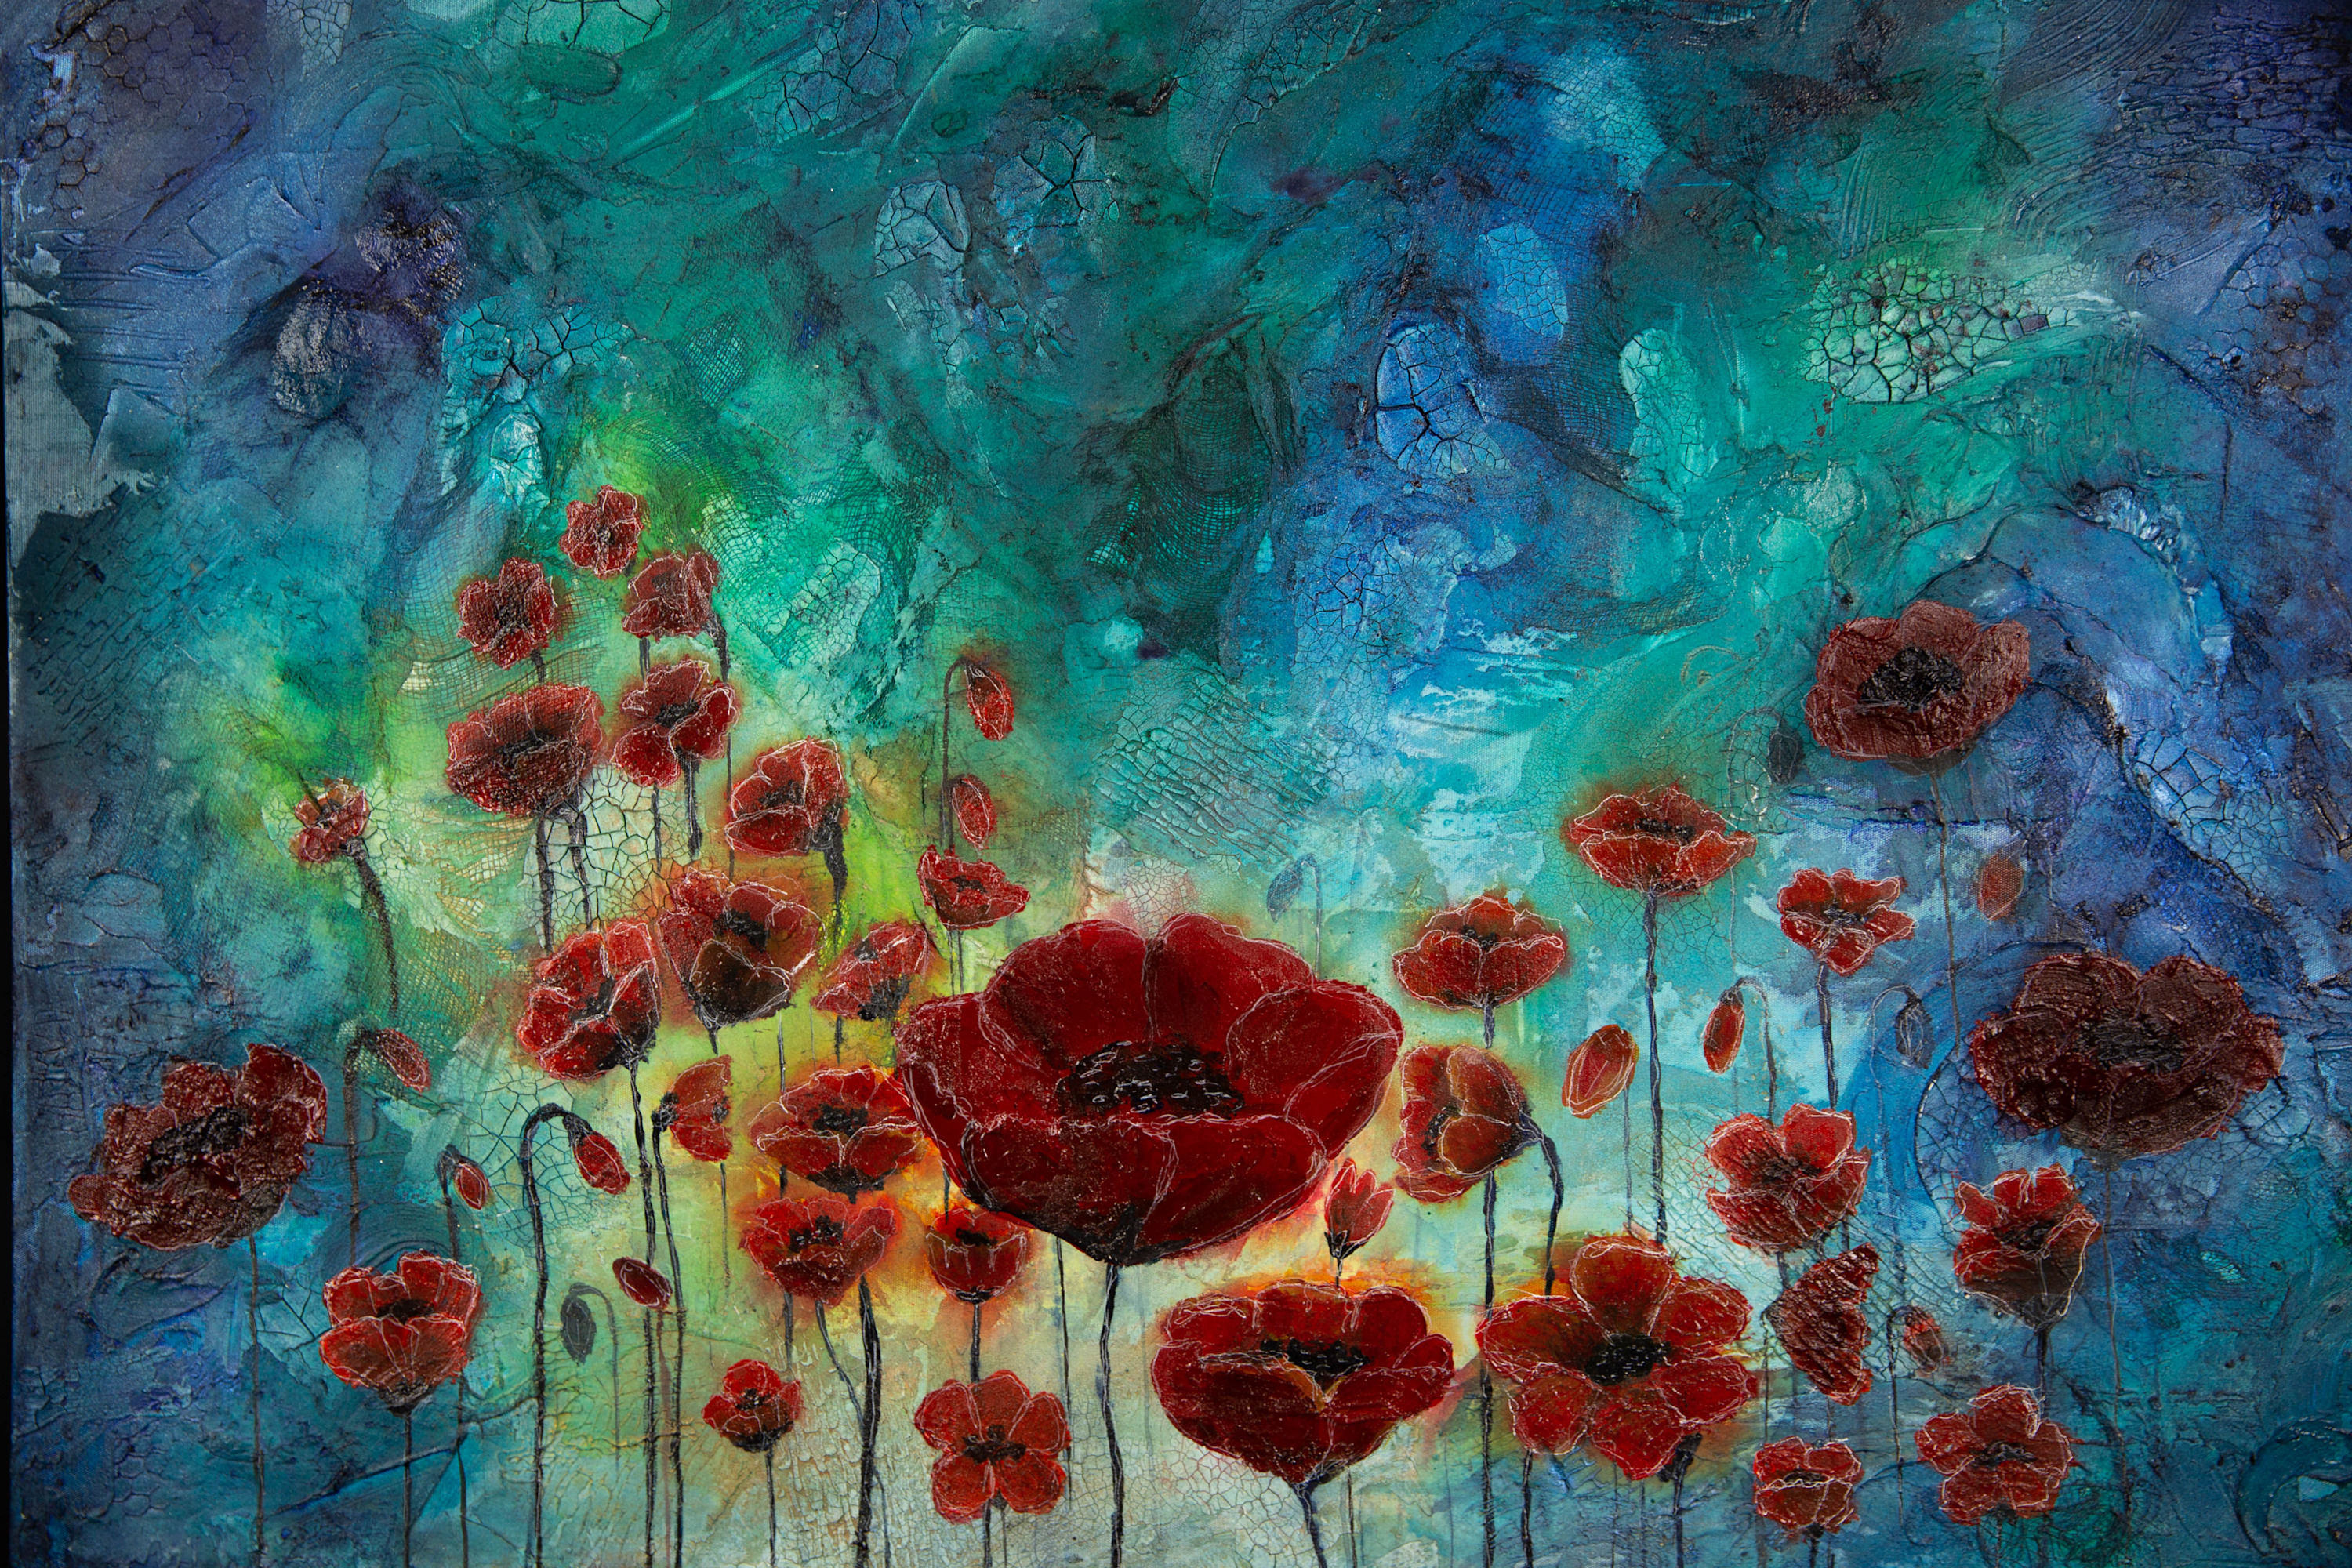 Virginia crowe   textured poppies 7636 qngq1d